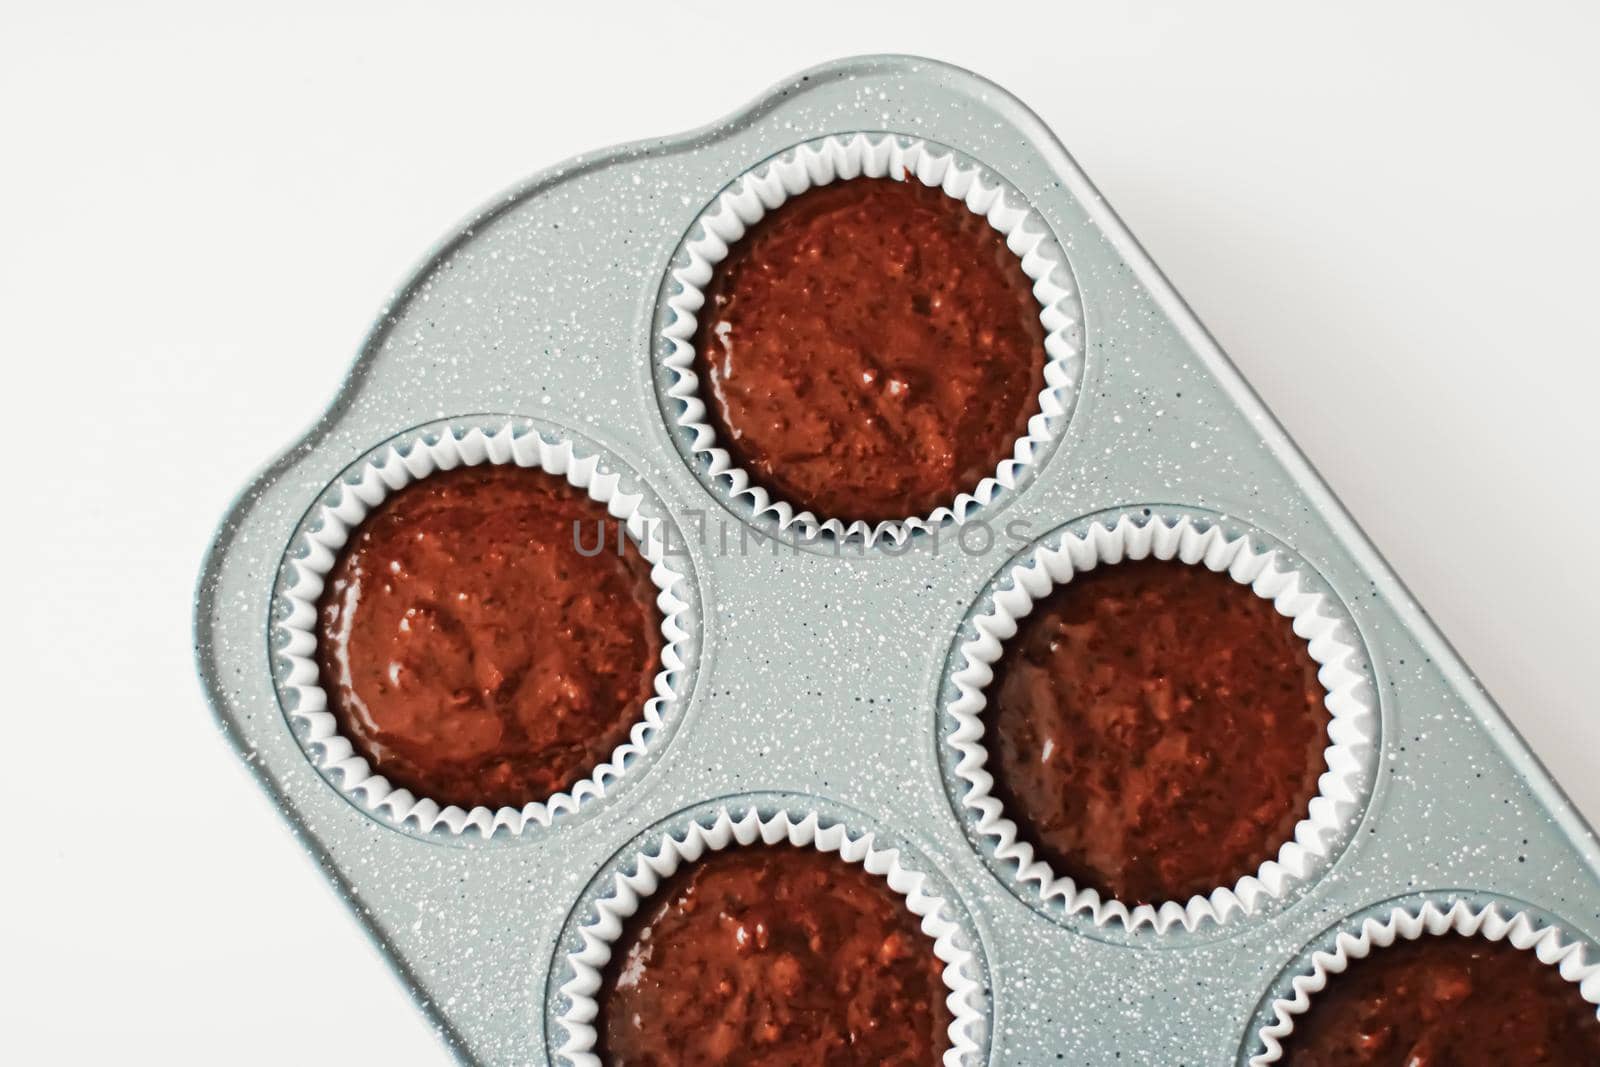 Chocolate muffin or cupcake batter in a pan ready to bake, homemade comfort food recipe by Anneleven